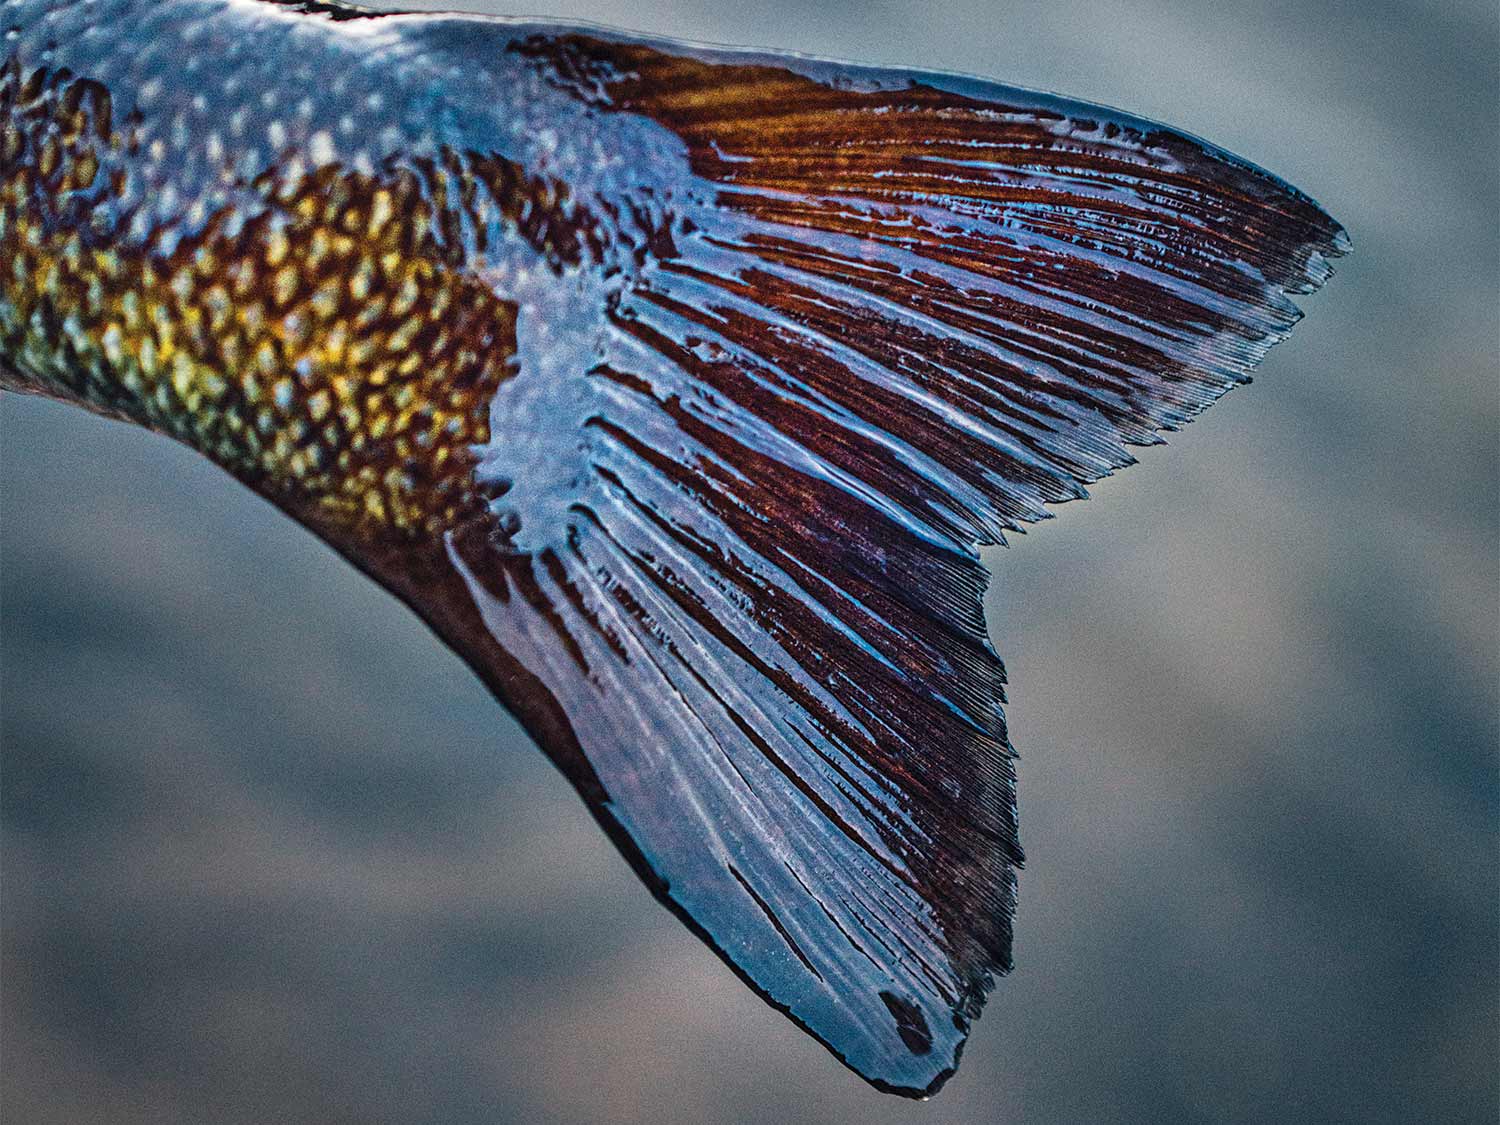 The tail of a fish.